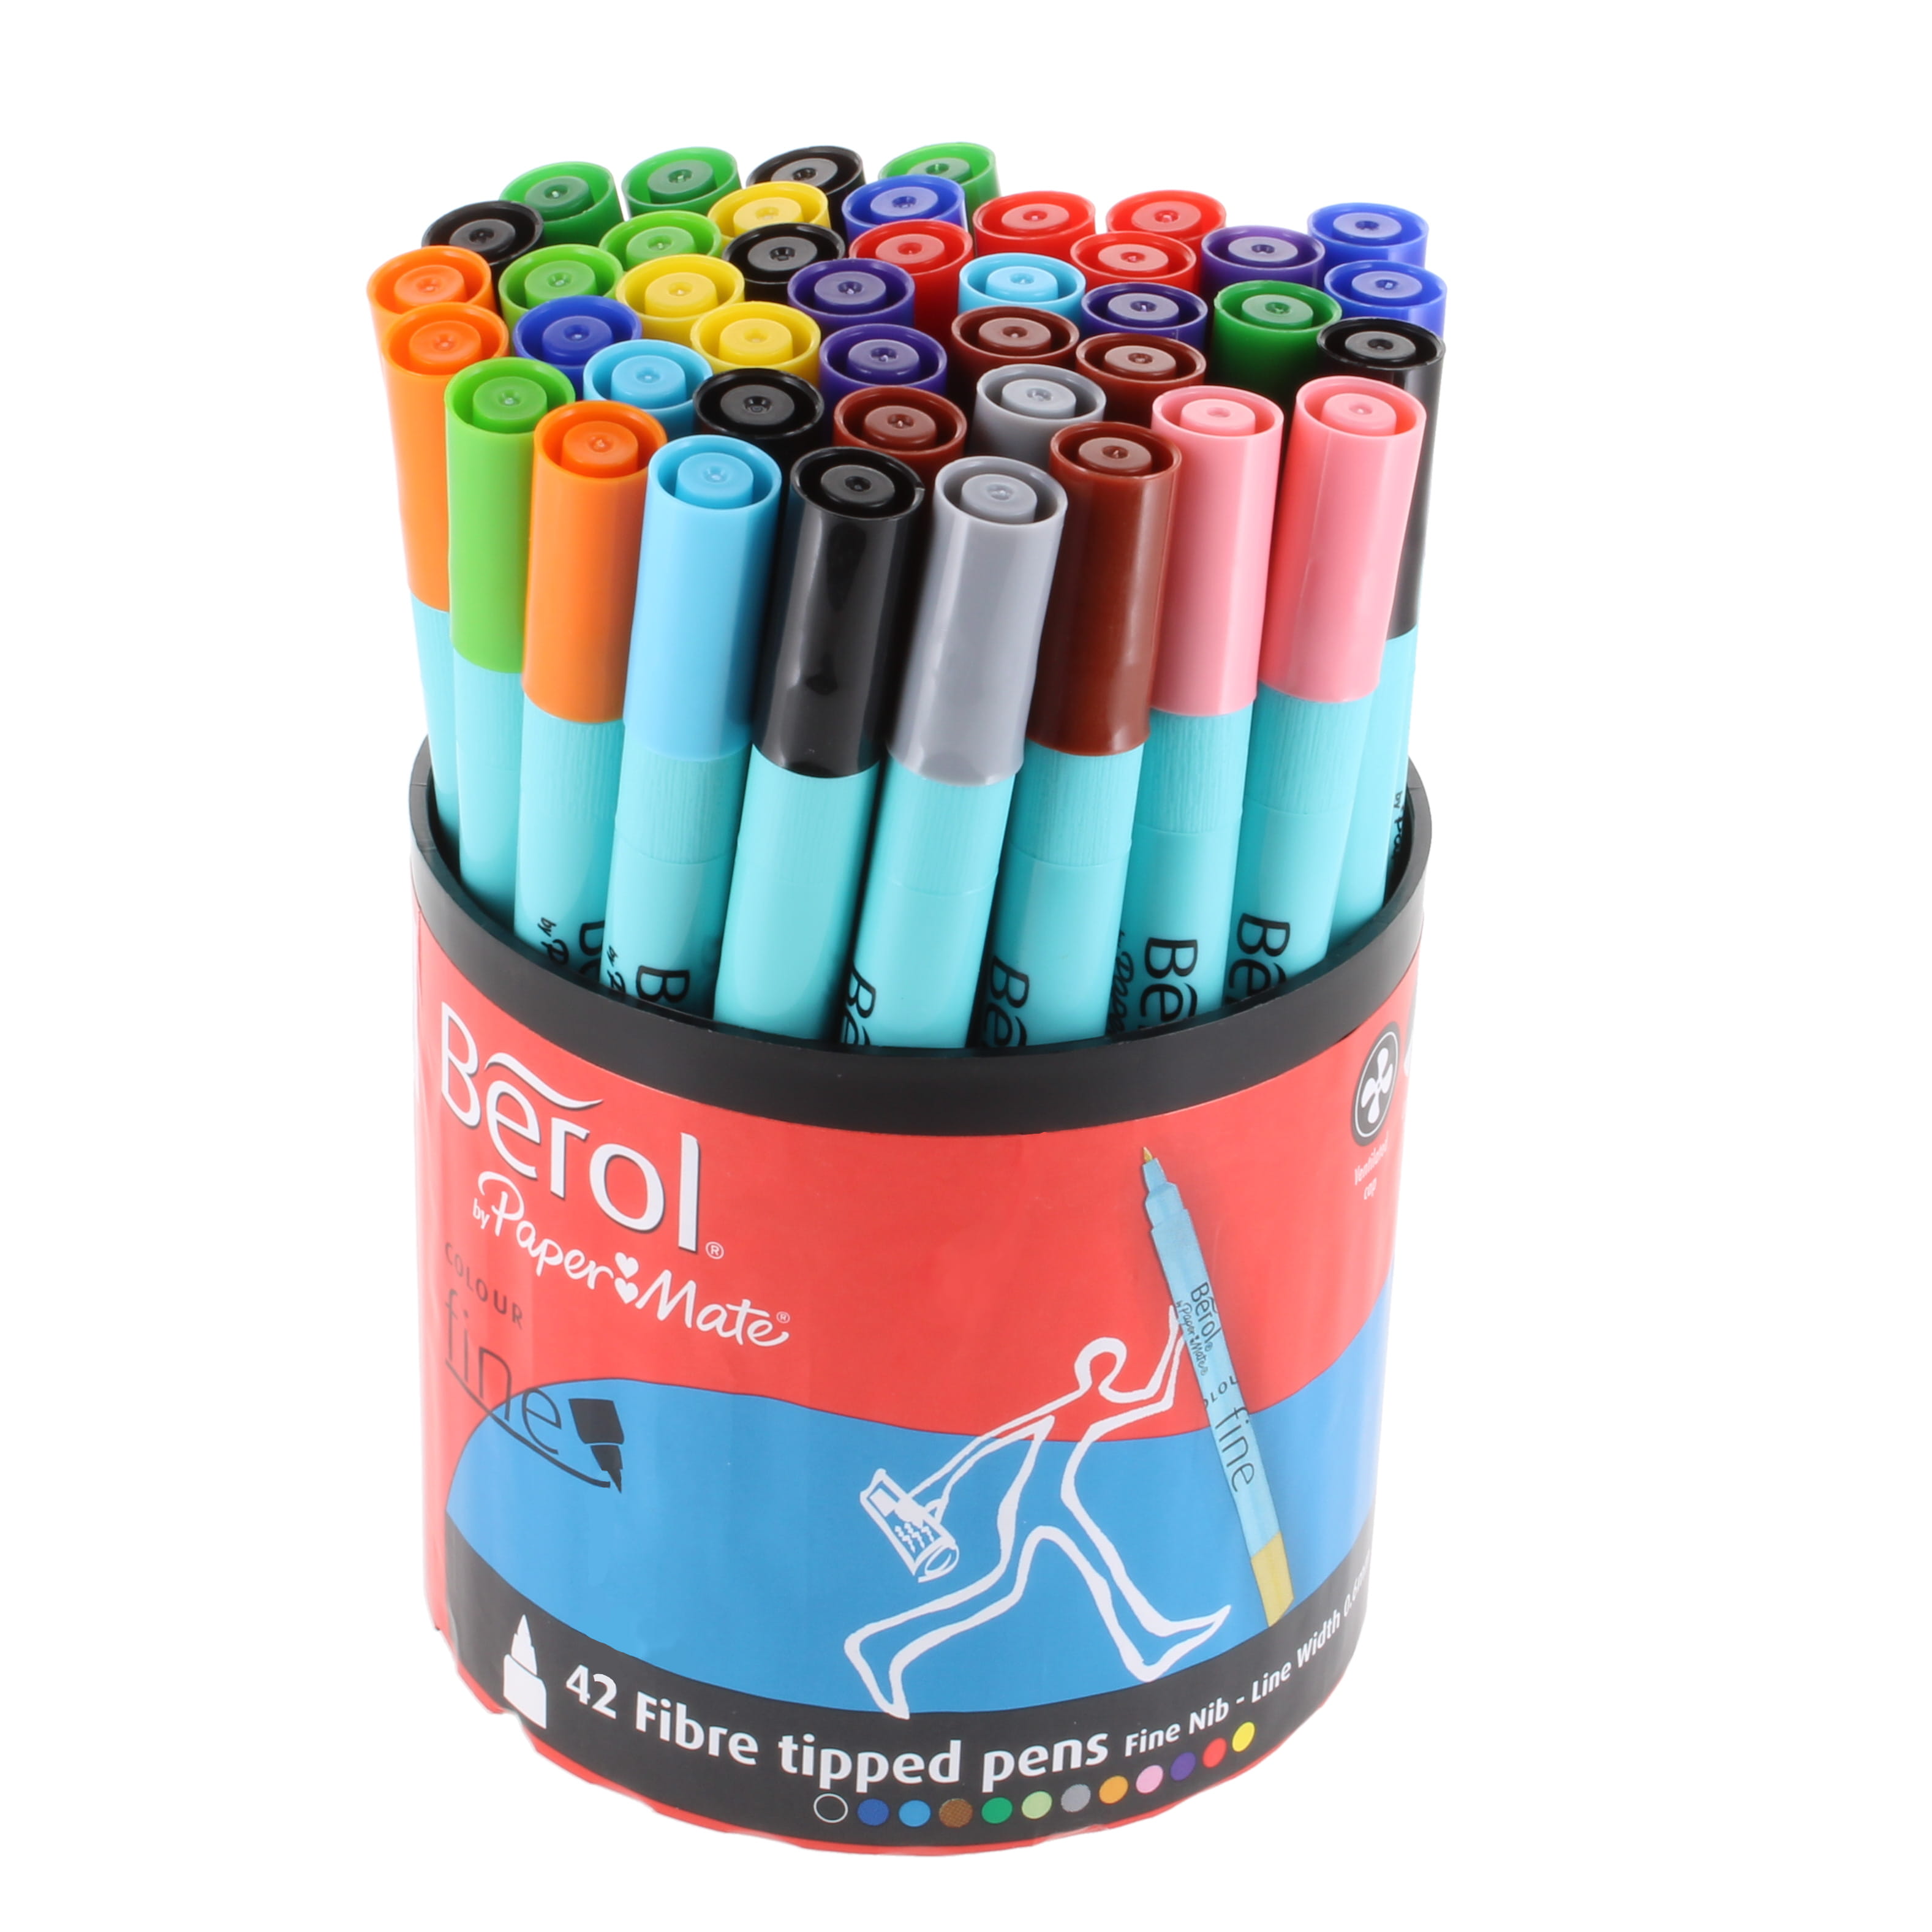 Berol Fine Colouring Pens Assorted - pack of 42 - STG24